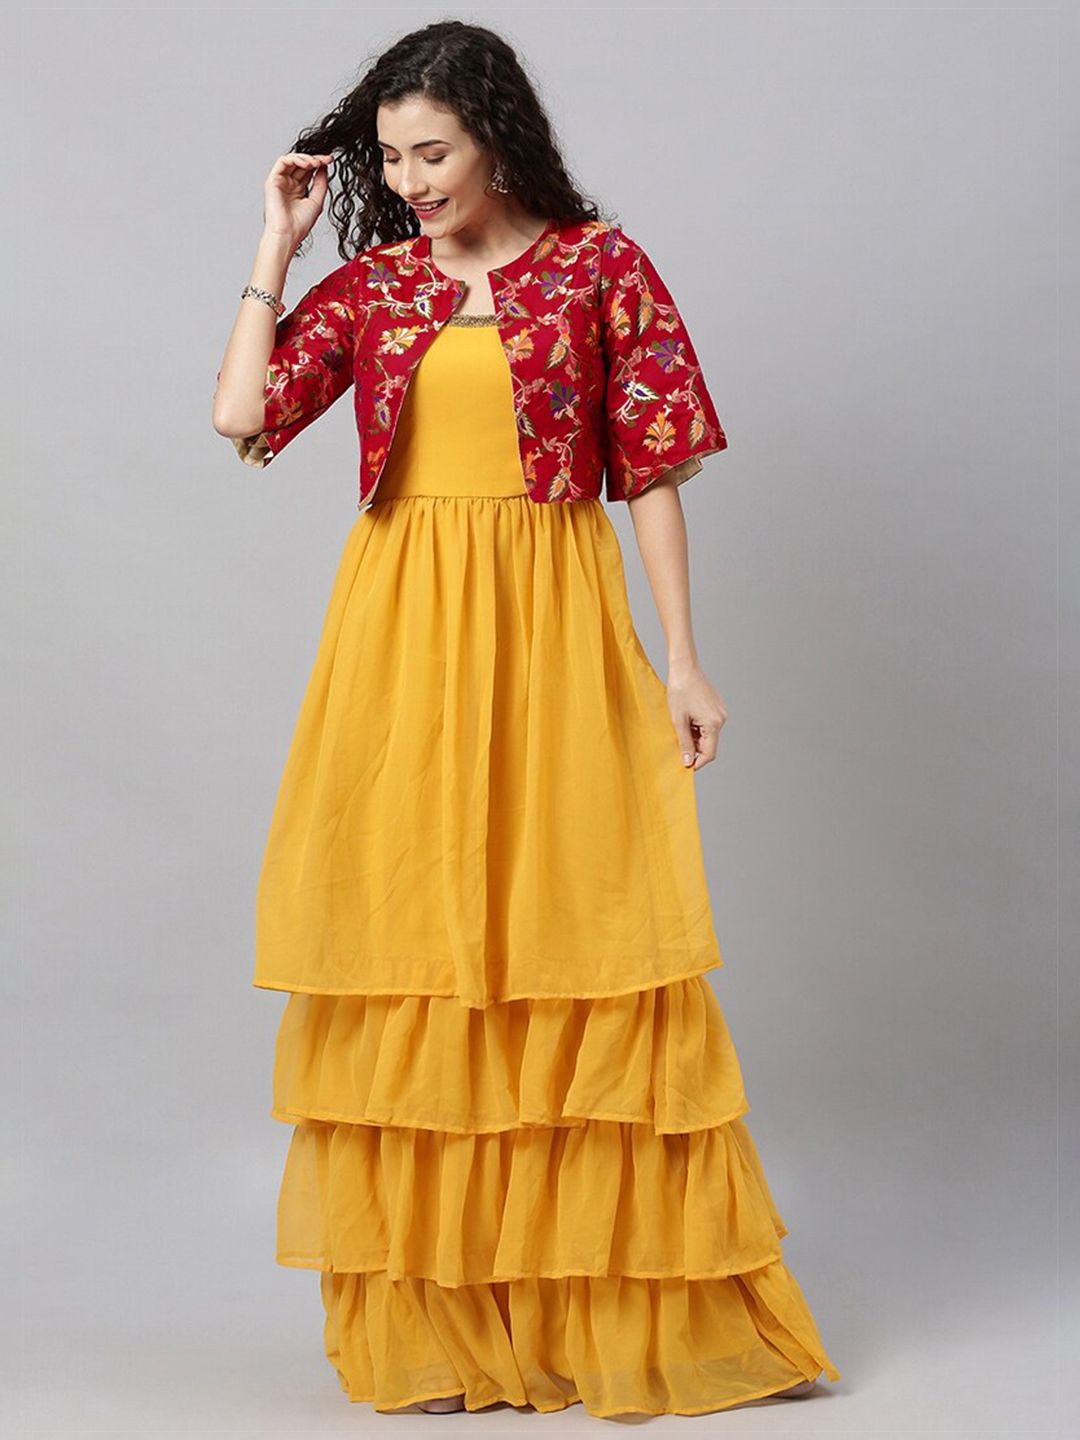 EthnoVogue Yellow & Maroon Layered Georgette Ethnic Maxi Dress With Jacket Price in India